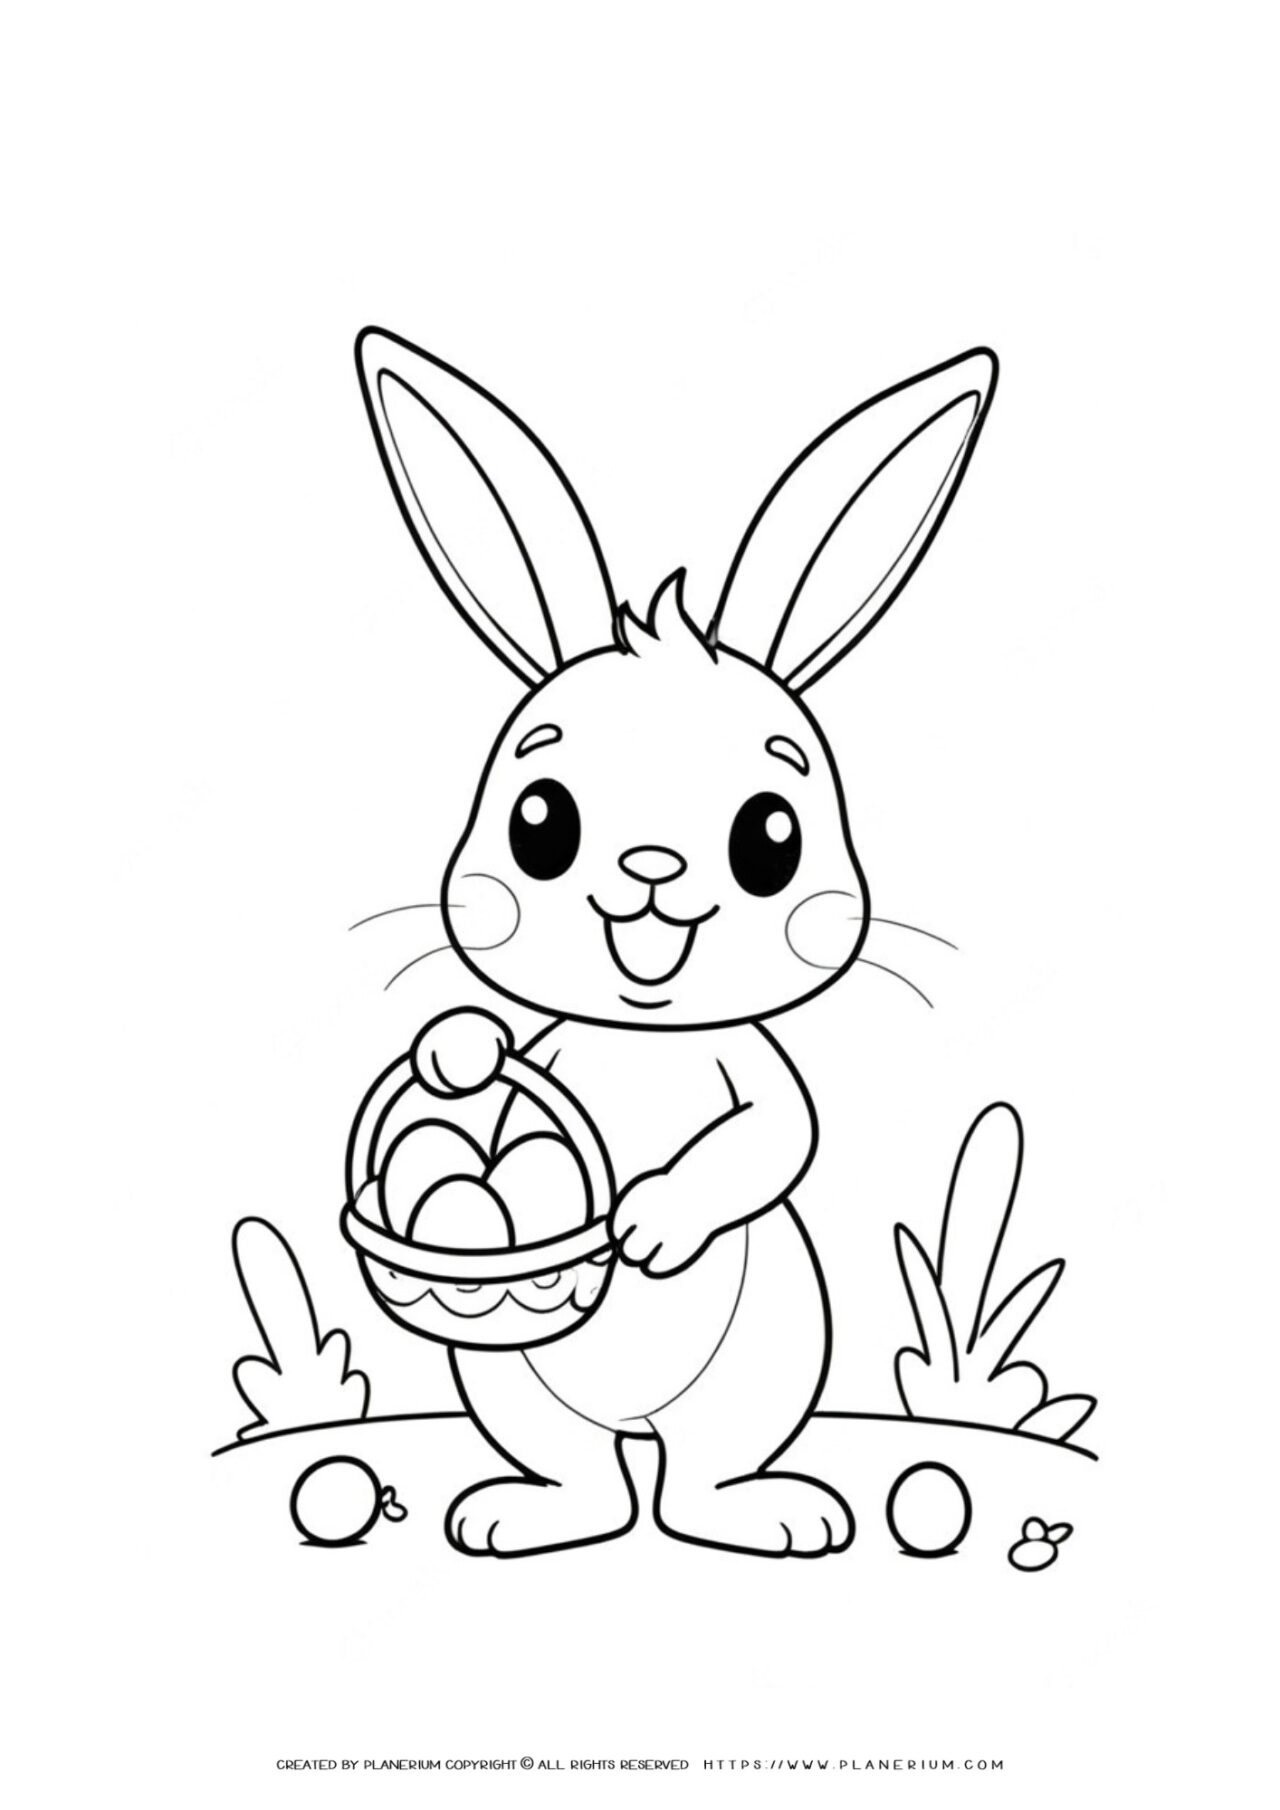 Cartoon bunny holding Easter eggs coloring page.